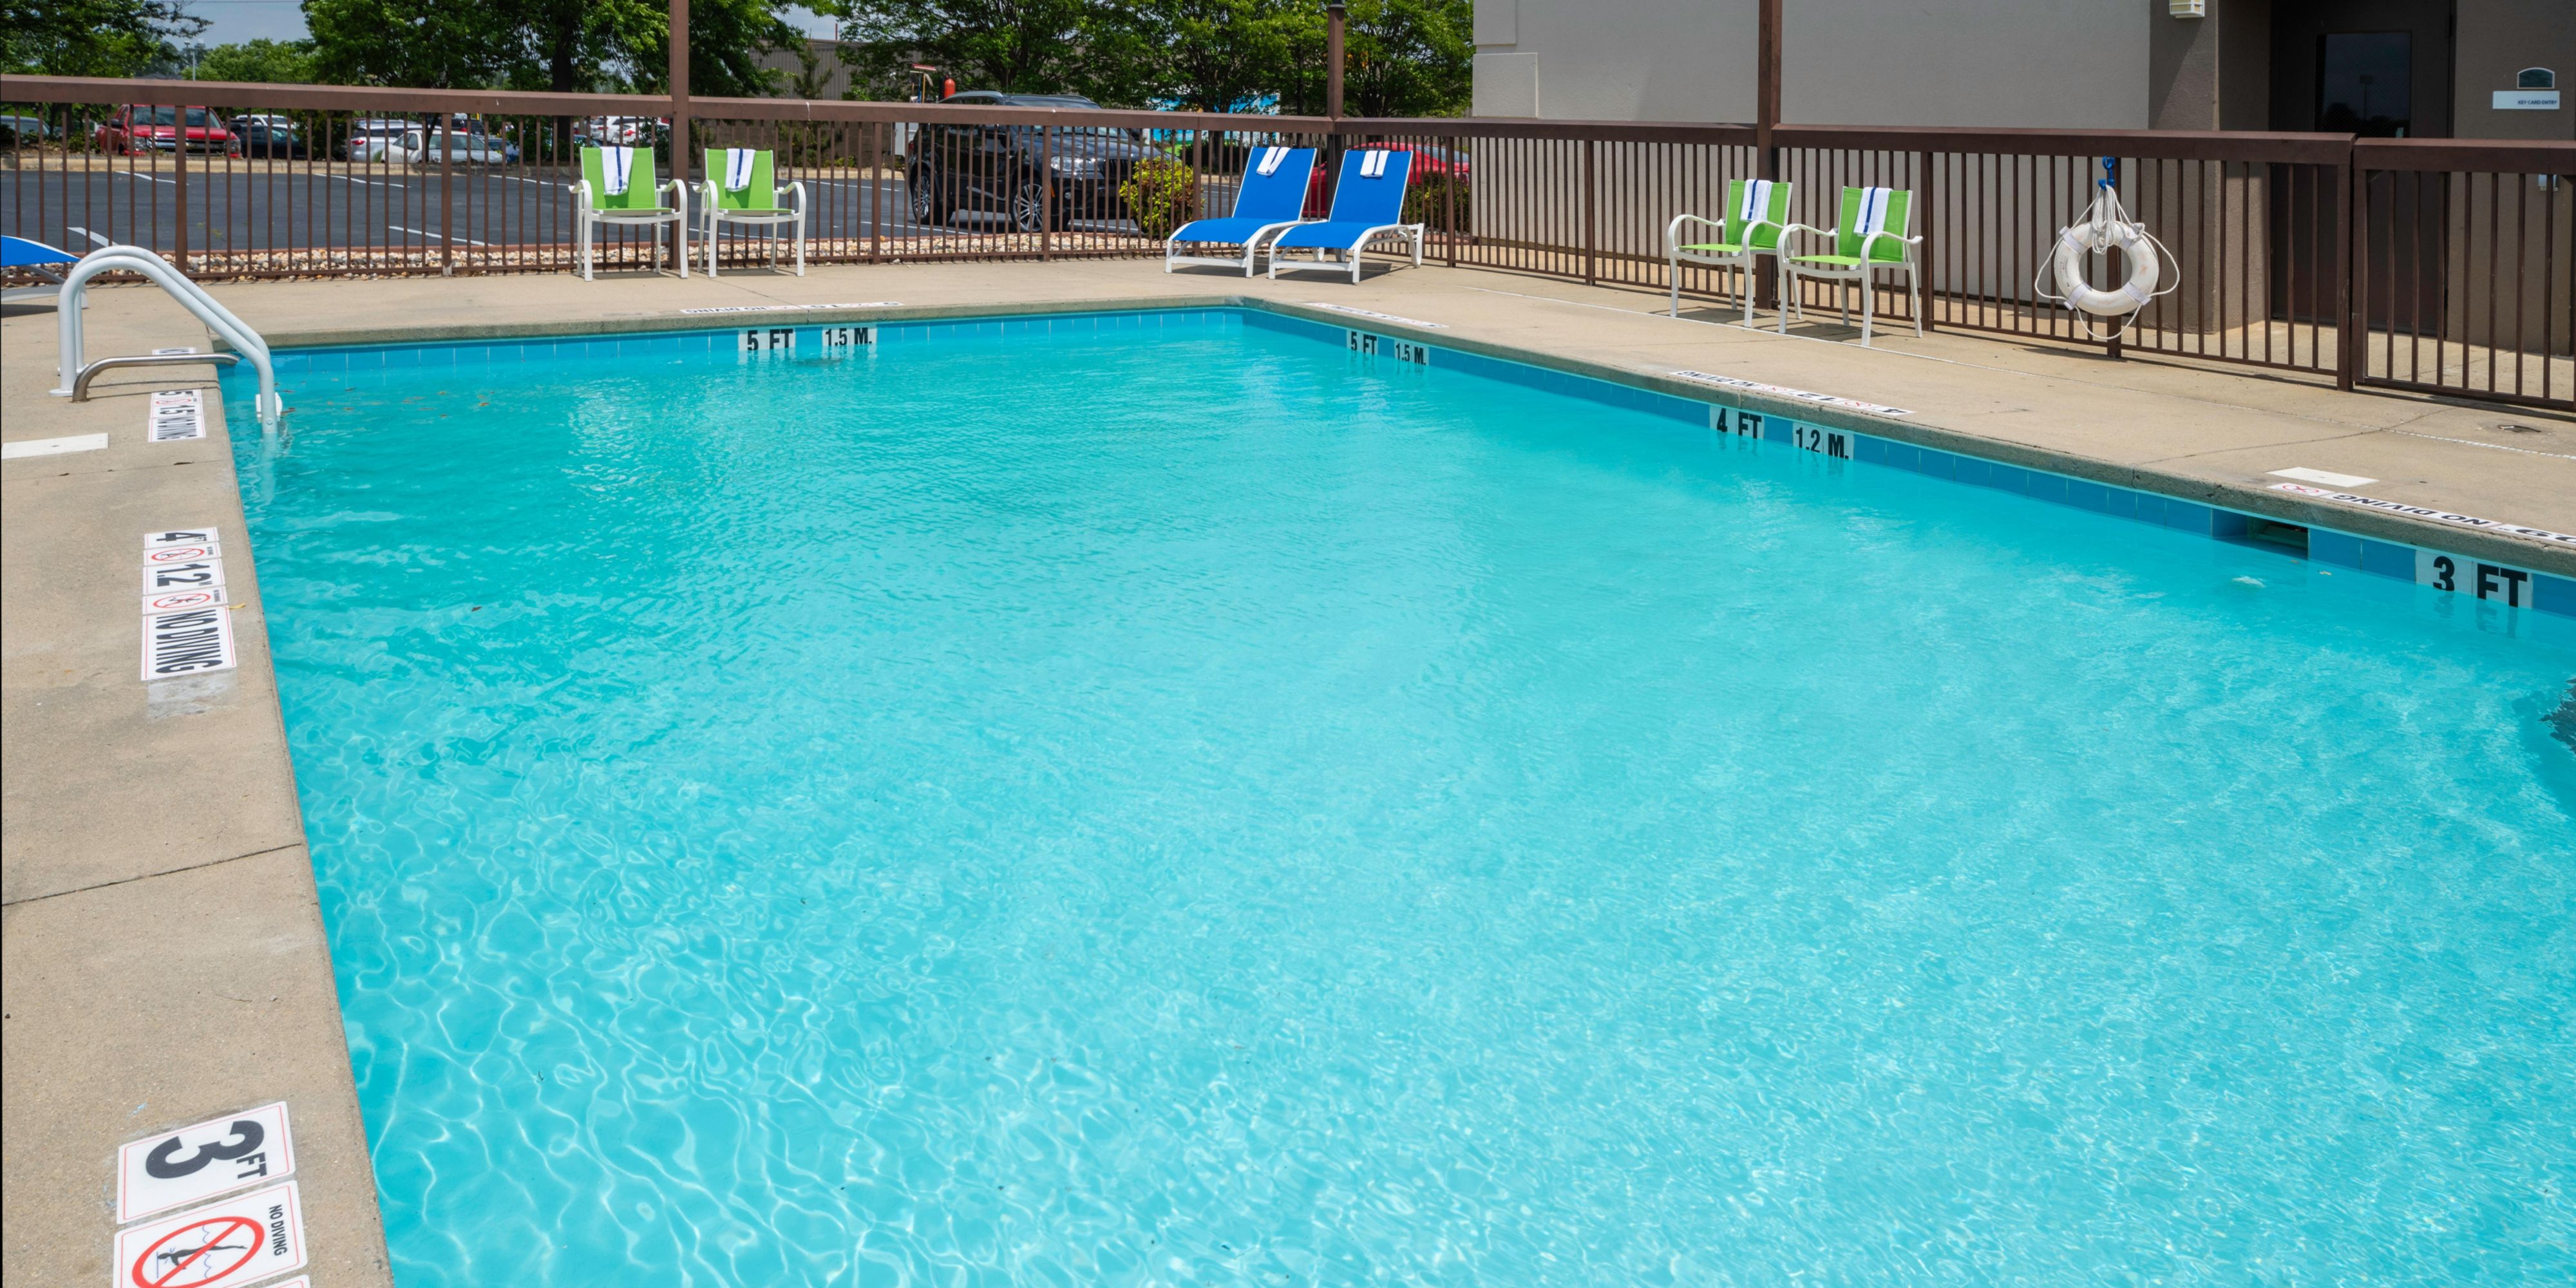 Soak up the sun from any angle, poolside, at Holiday Inn Express Clayton (SE Raleigh). Let our outdoor pool be your oasis. Book now to take a dip!